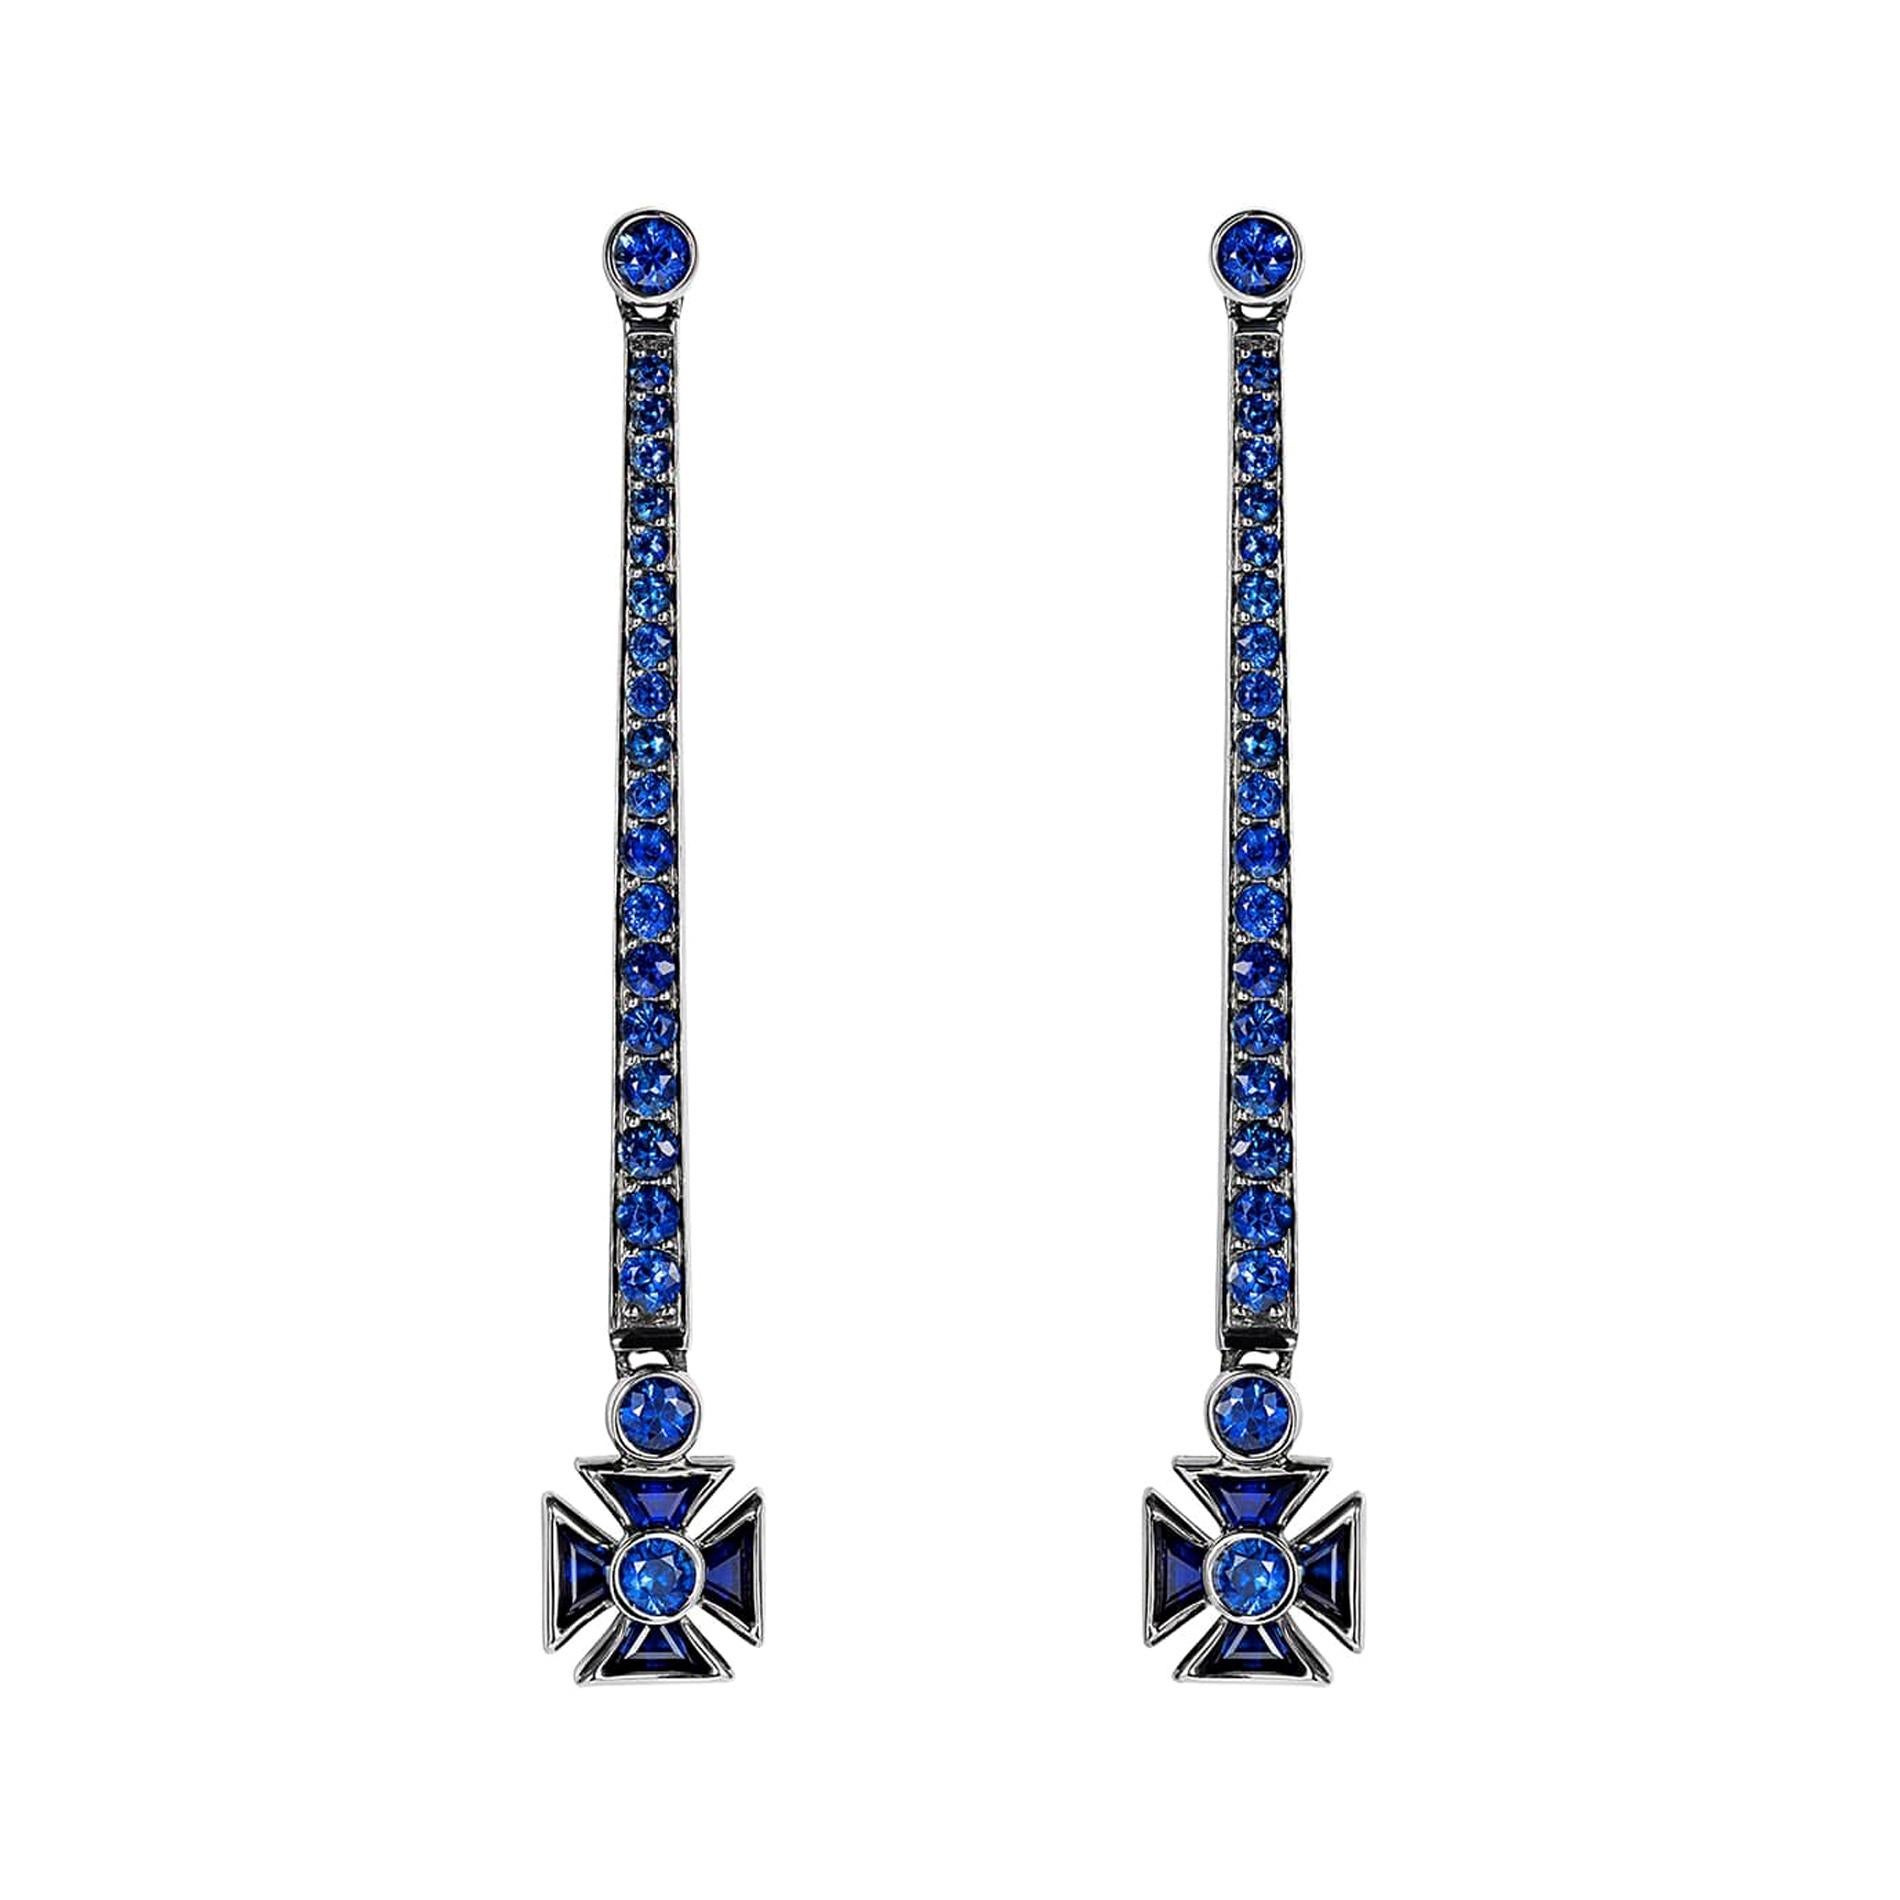 Sybarite Royal Jubilee Earrings in Blackened Gold with Sapphires